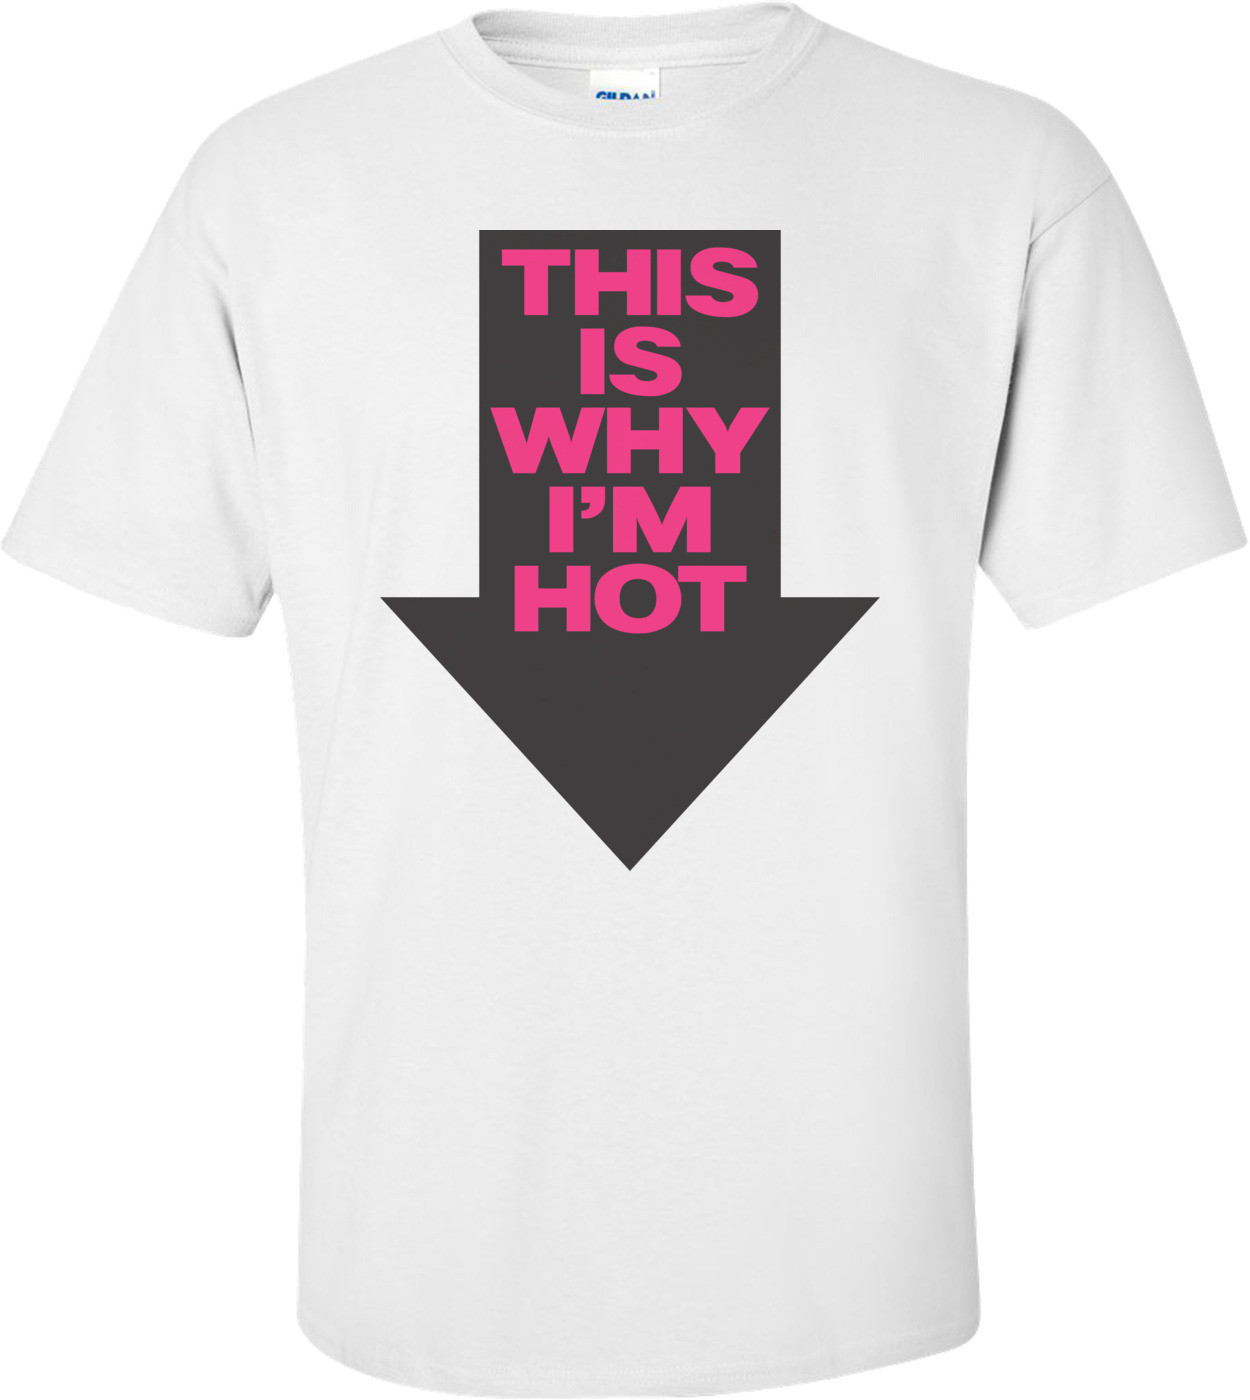 This Is Why I'm Hot Shirt